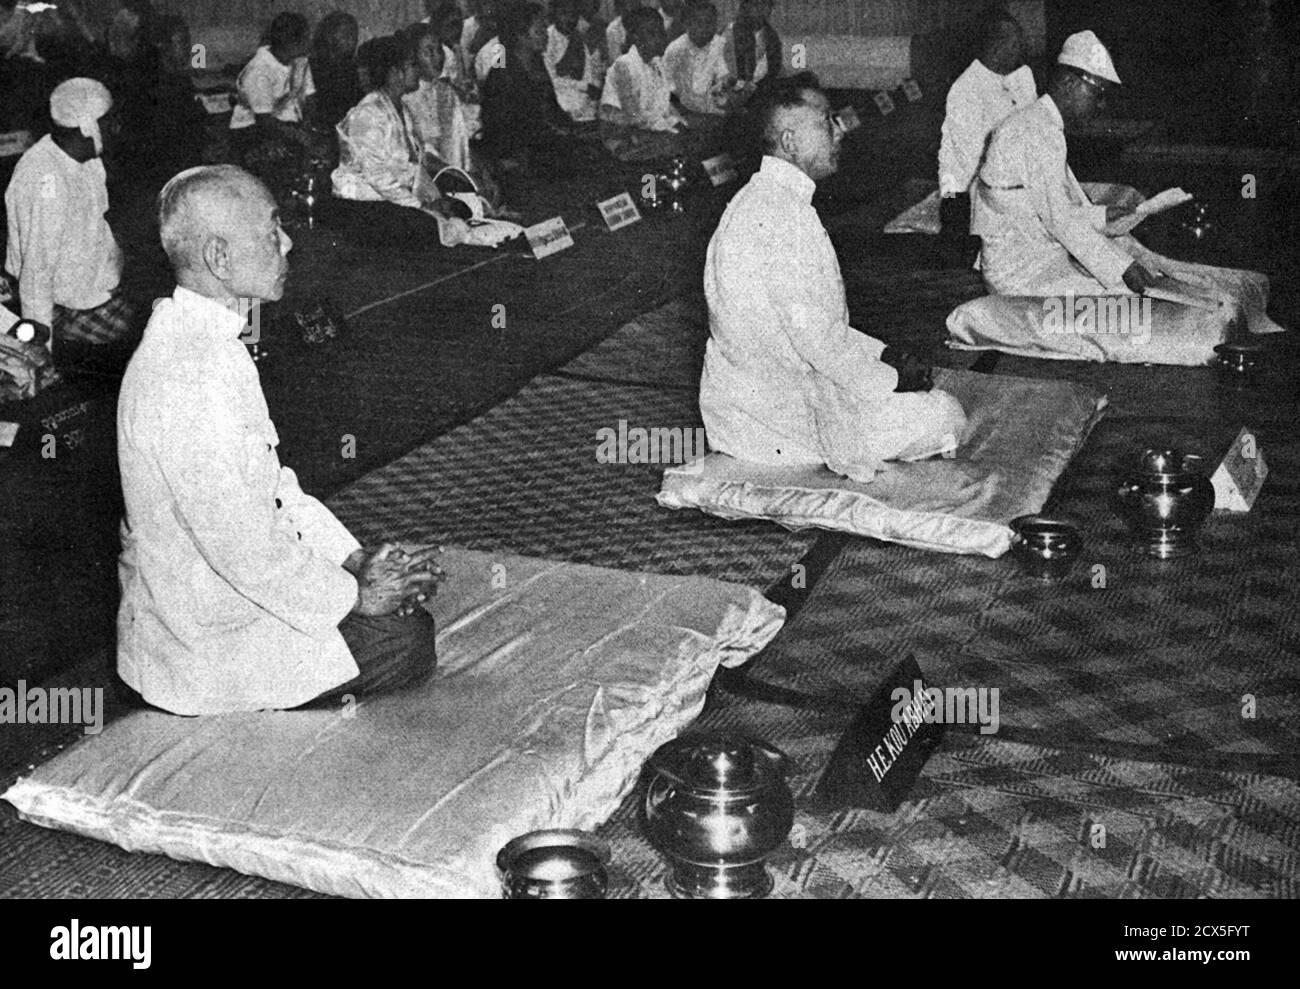 Original Caption: Kou Abhay, chairman of the council of ministers and Sisavang Vatthana, crown prince of Laos and Ba U, president of Burma, at the opening of the Laos-Cambodia session of the Buddhist Council (Chaṭṭa Sangāyanā), 1955-04-28 Stock Photo